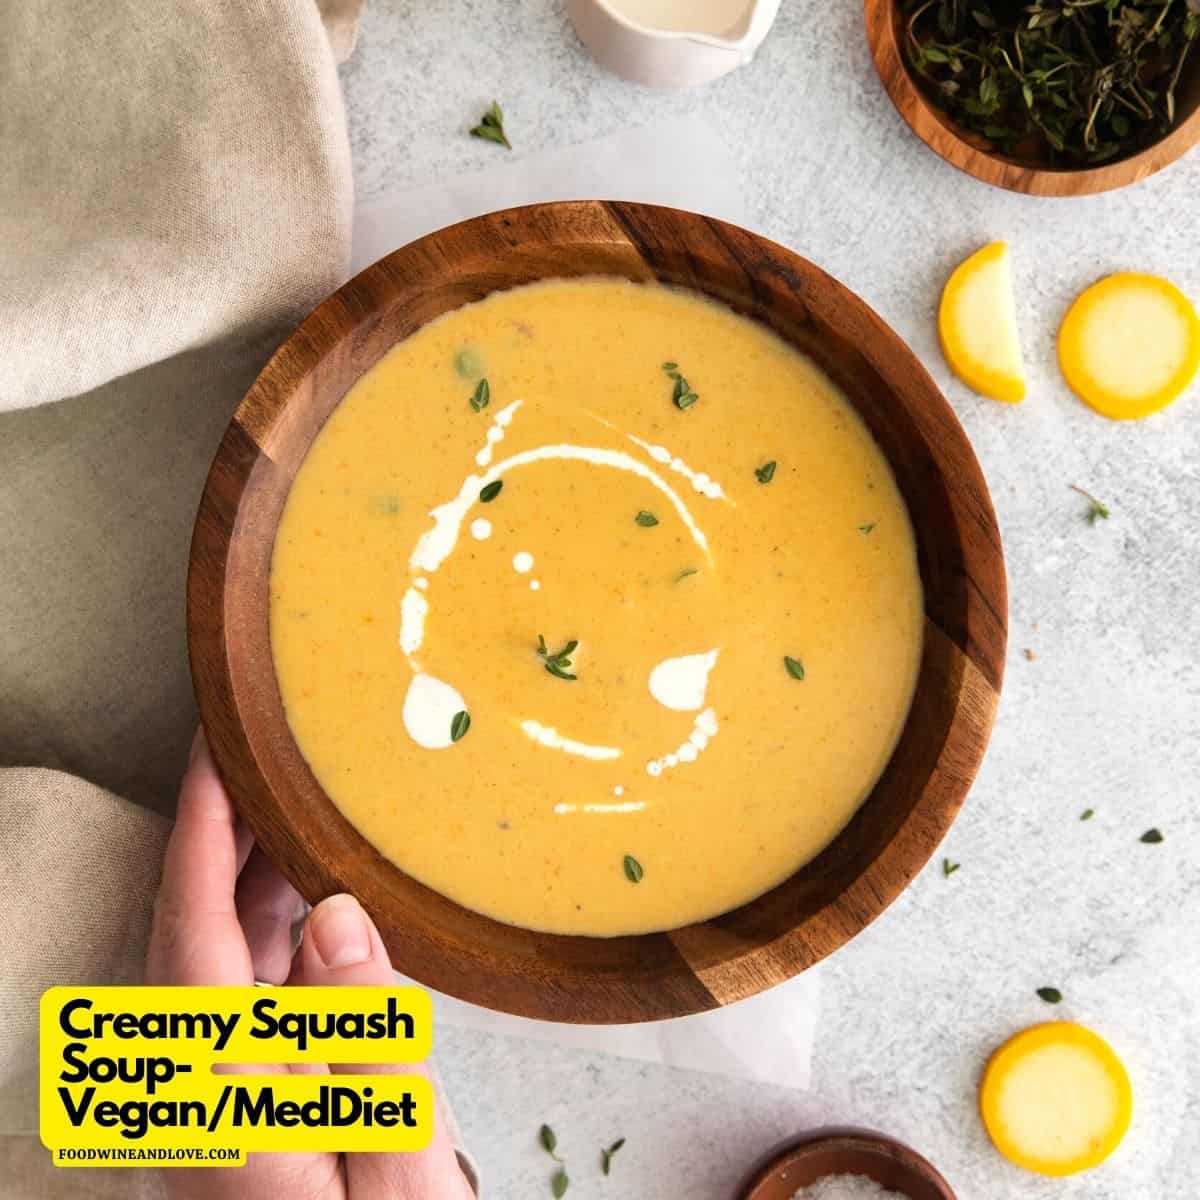 Creamy Summer Squash Soup Recipe- a delicious and simple soup made with summer squash, potatoes, and vegetables.  Vegan/MedDiet